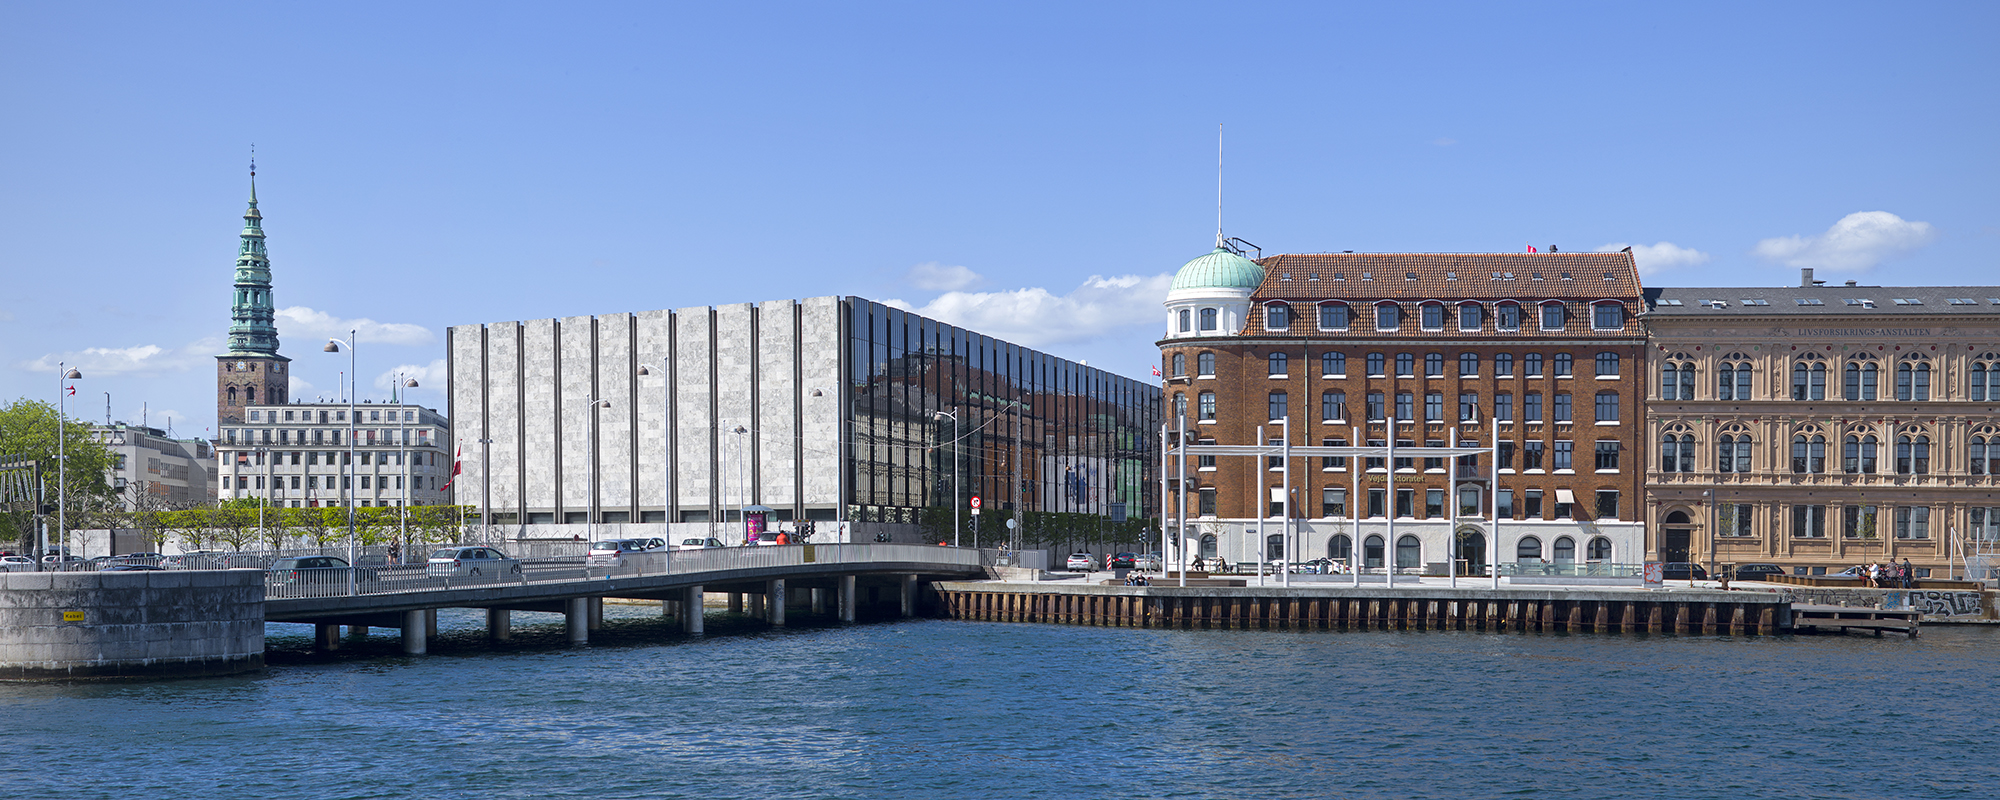 Urban jumble: the building that wants to upset the calm of Copenhagen, Architecture